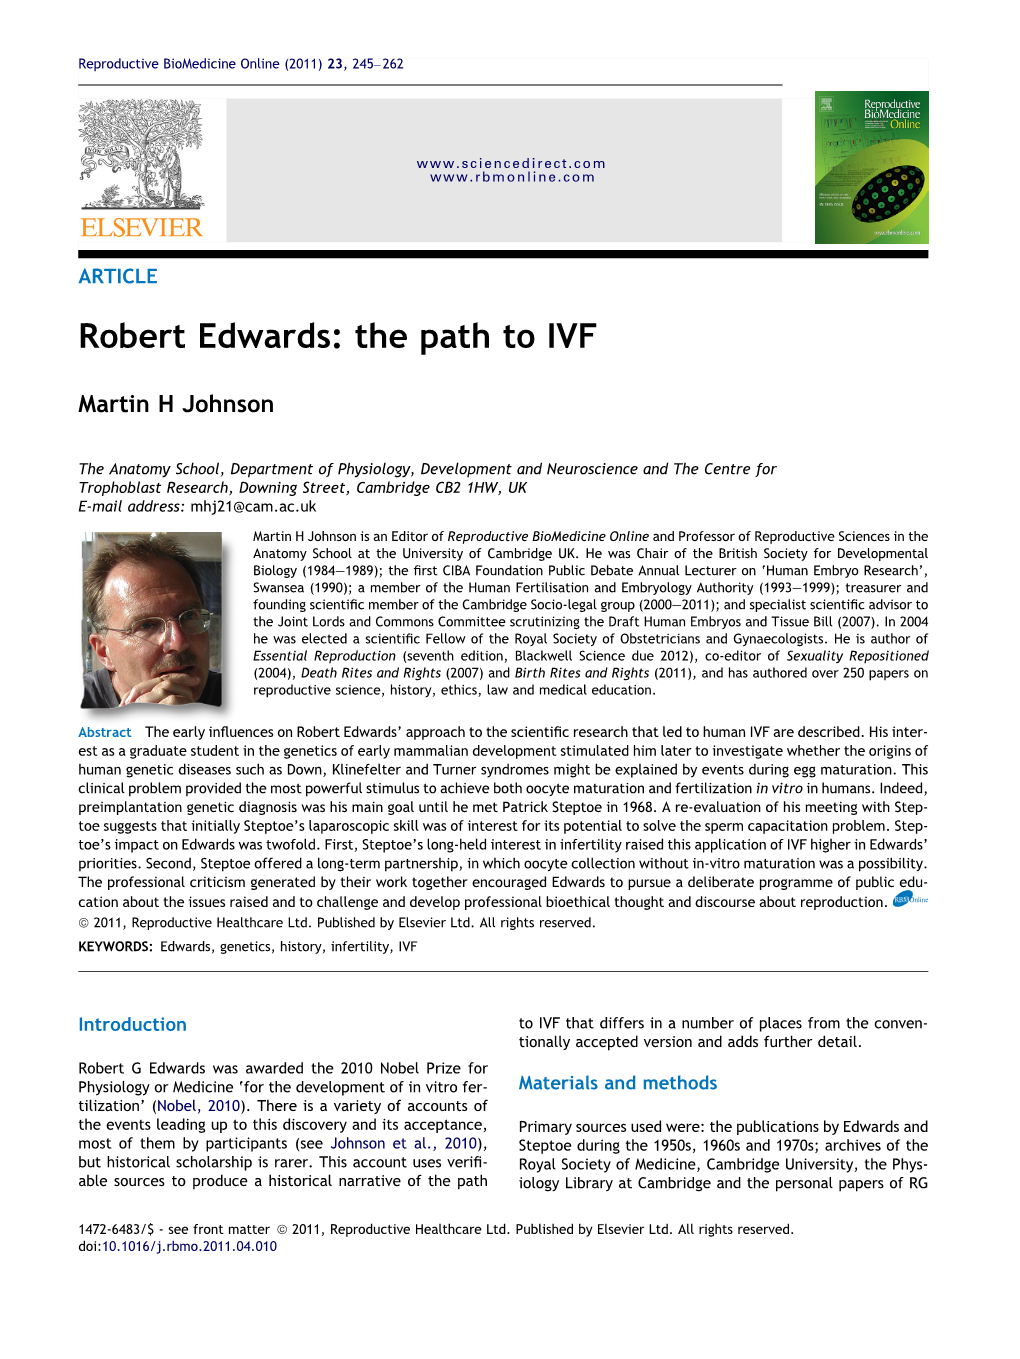 Robert Edwards: the Path to IVF